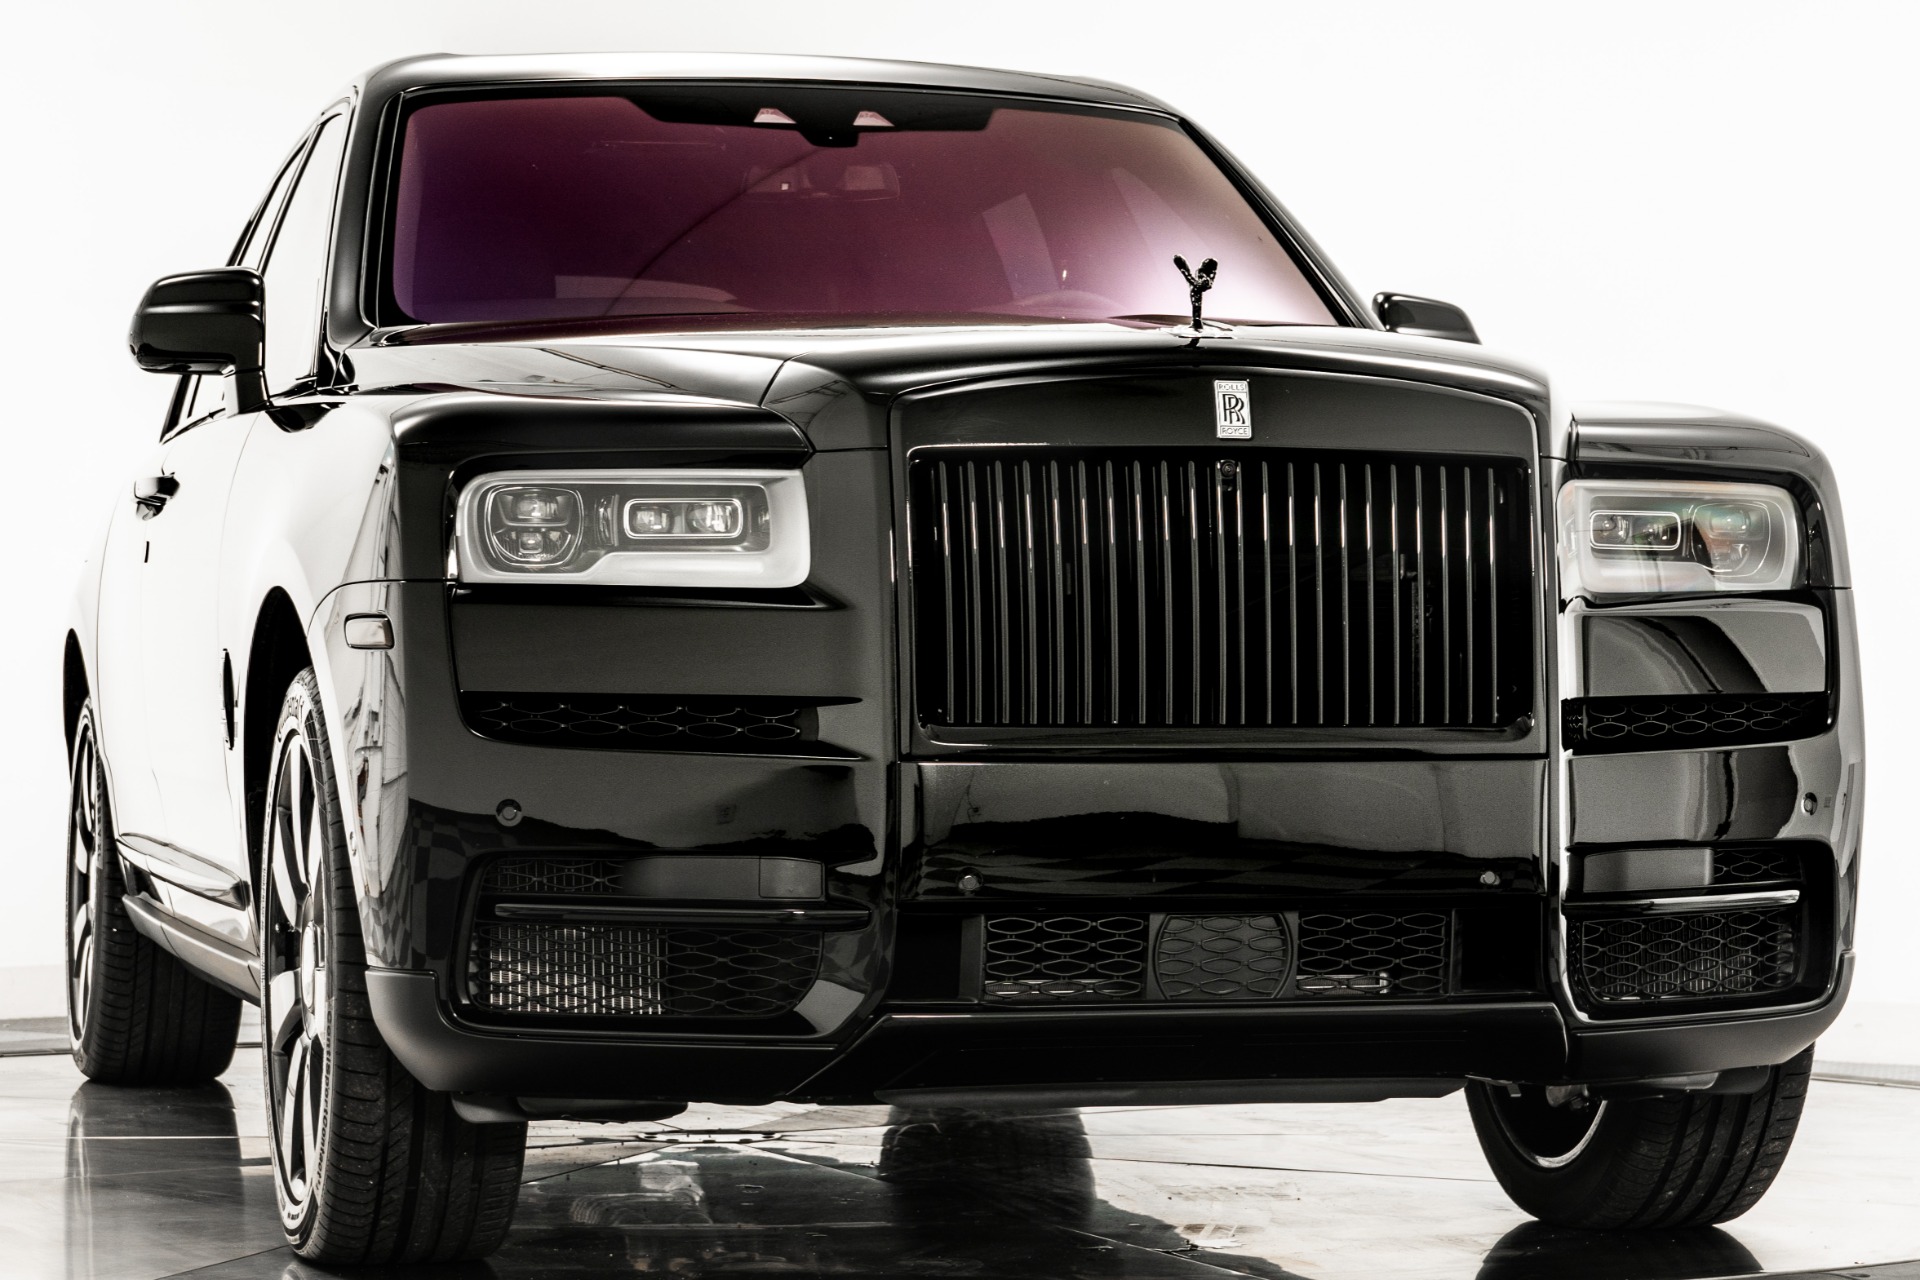 Used 2022 Rolls-Royce Cullinan SUV The HOTTEST Example Available